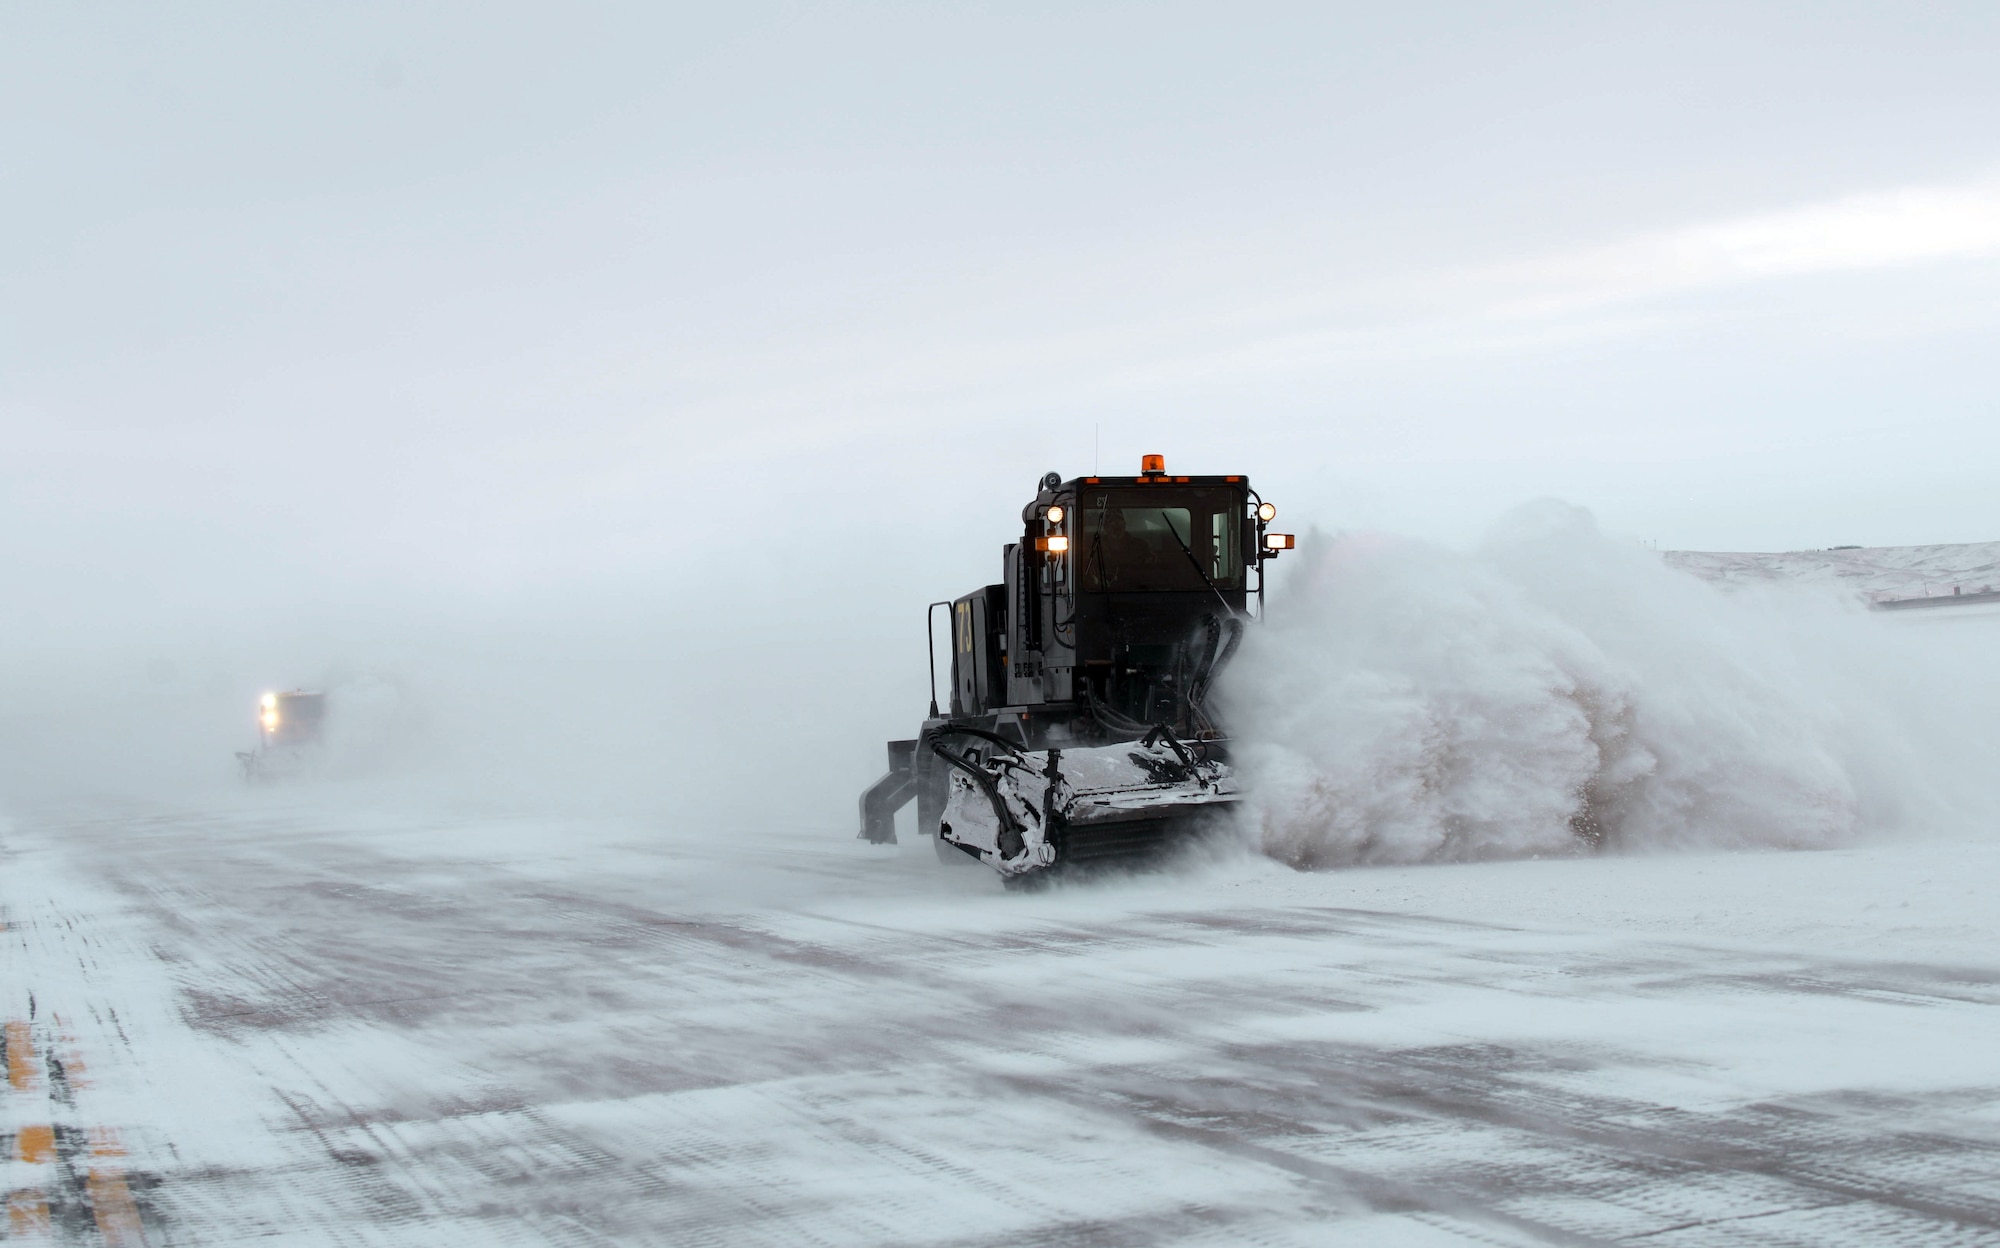 Personnel from the 28th Civil Engineer Squadron remove snow from the flight line at Ellsworth Air Force Base, S.D., on Jan. 25, 2017. With more than three million square yards of flight line, the civil engineers, also known as “Dirt Boyz”, have cleared over 20 inches of snow this season alone. (U.S. Air Force photo by Airman 1st Class Donald C. Knechtel)